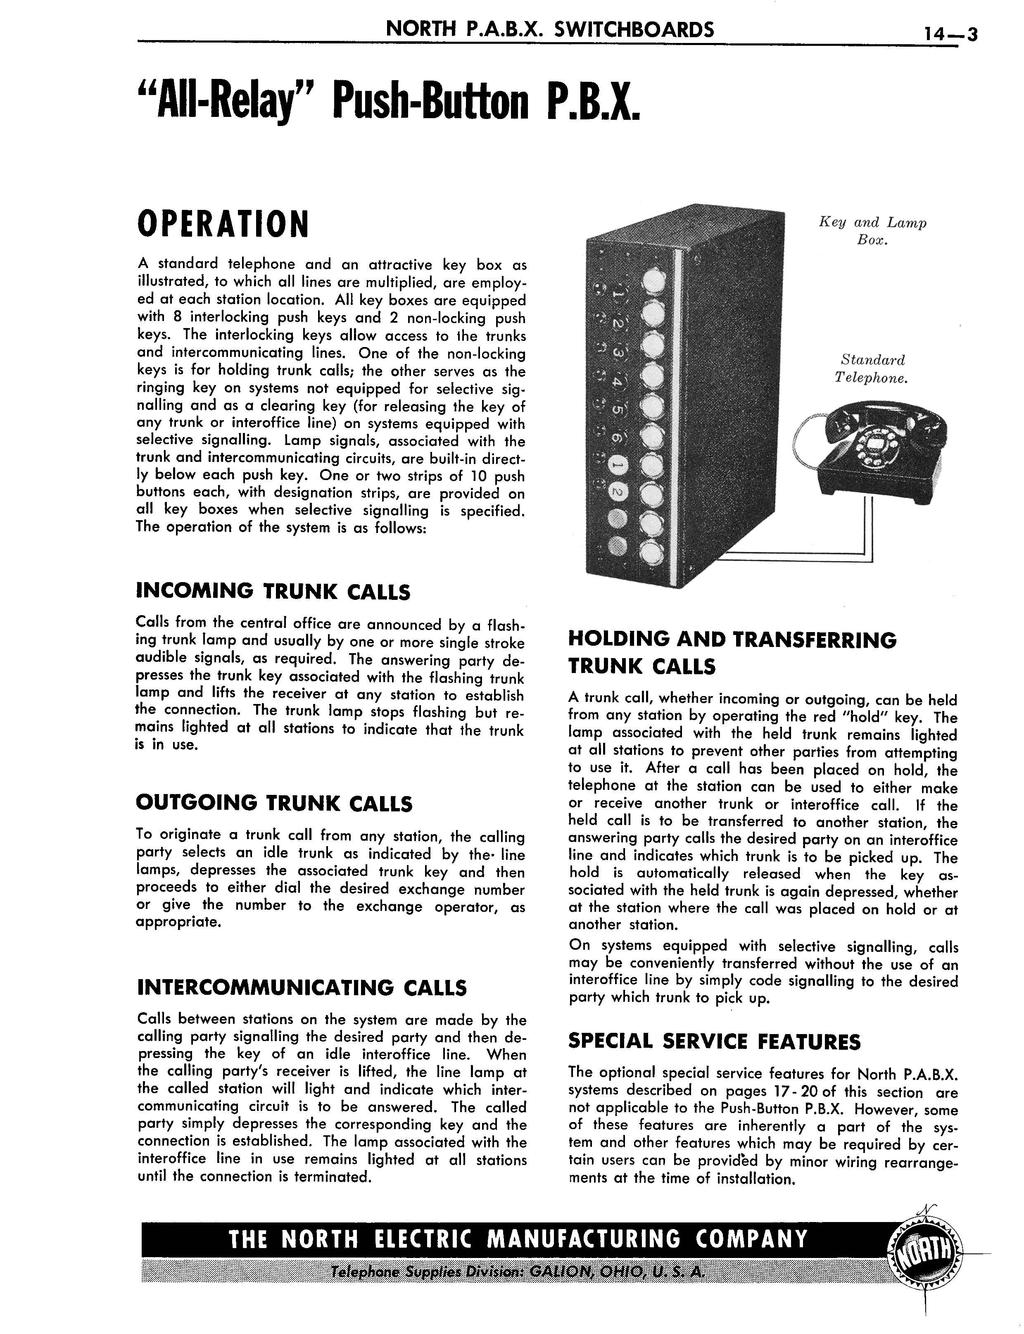 14-3 "All-Relay" Push-Button P.B.X. OPERATION Key and Lamp Box. A standard telephone and an attractive key box as illustrated, to which all lines are multiplied, are employed at each station location.